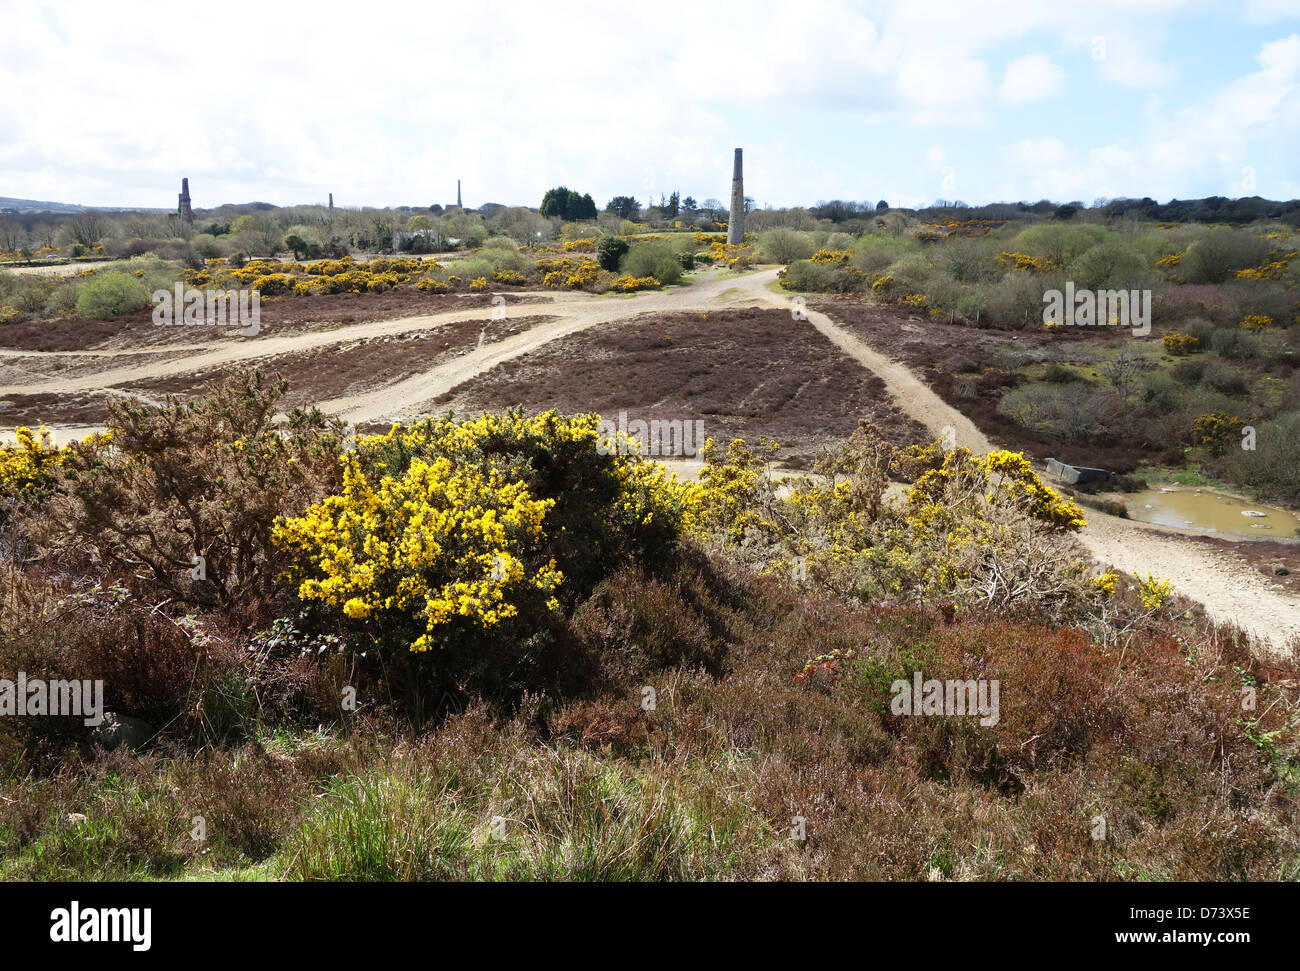 Tin MIning wasteland near the village of Chacewater in Cornwall, UK Stock Photo